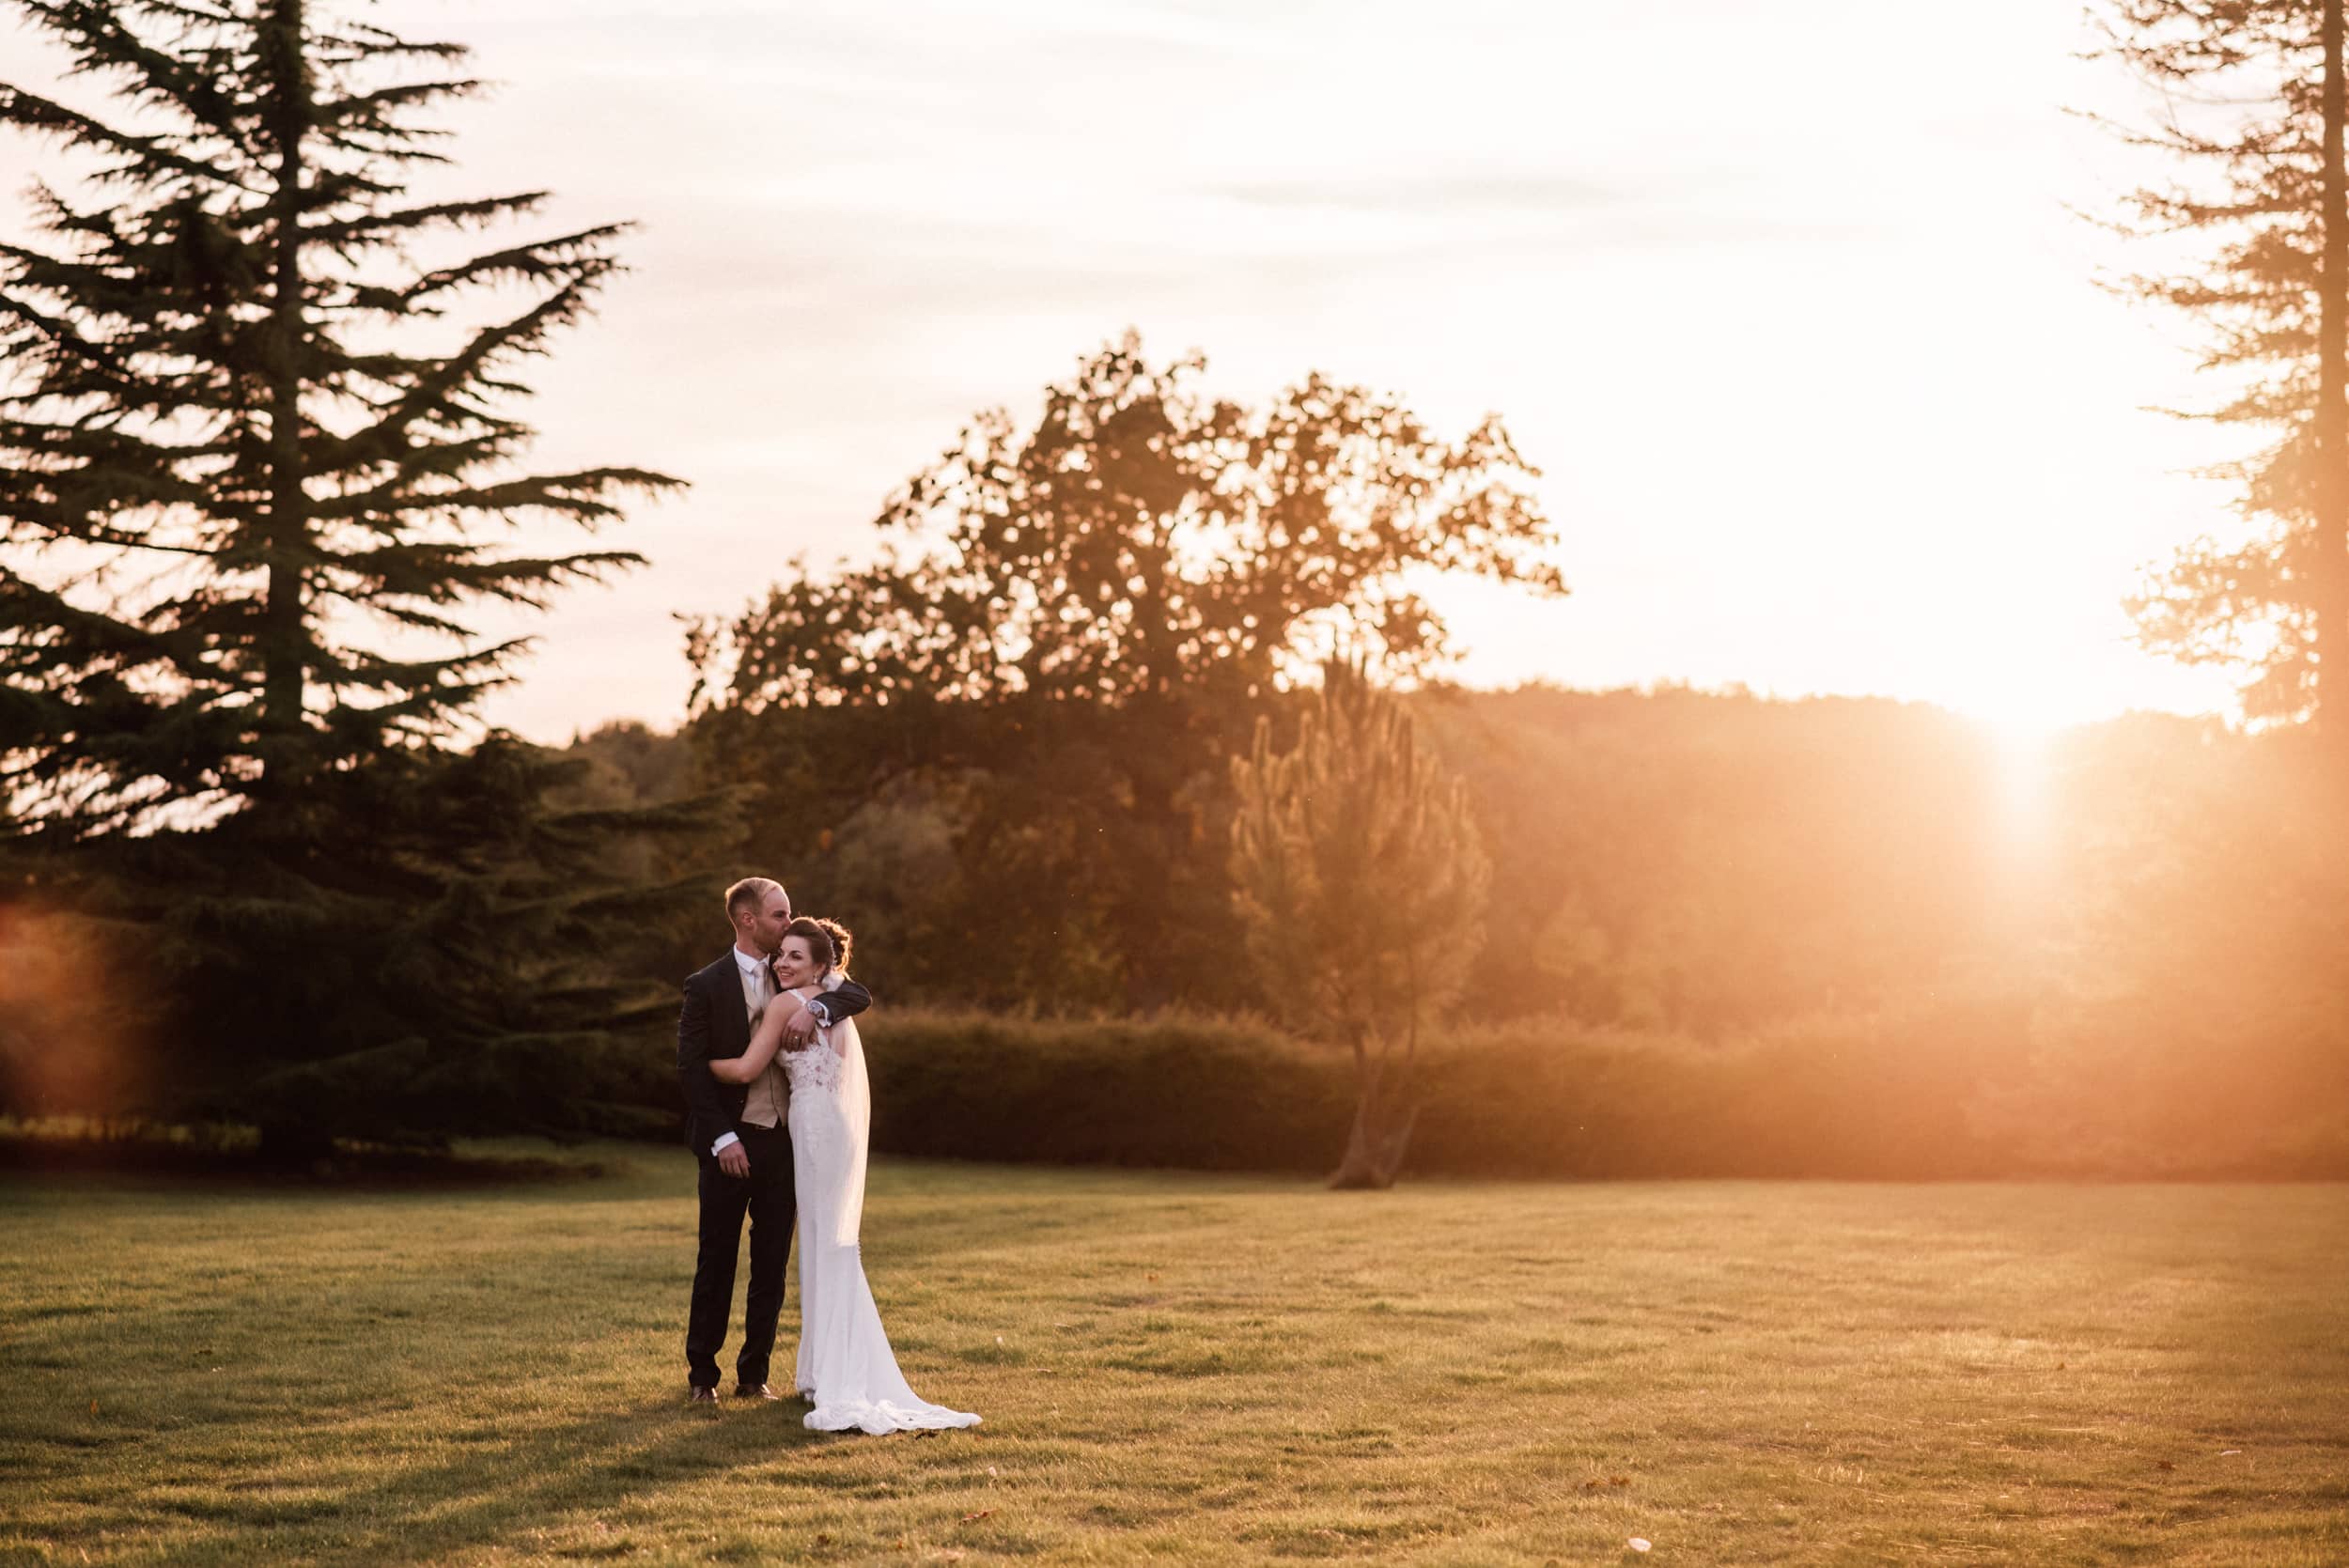 A Newlywed couple embrace in the grounds of Holmewood Hall, Wedding Venue in Camridgeshire.